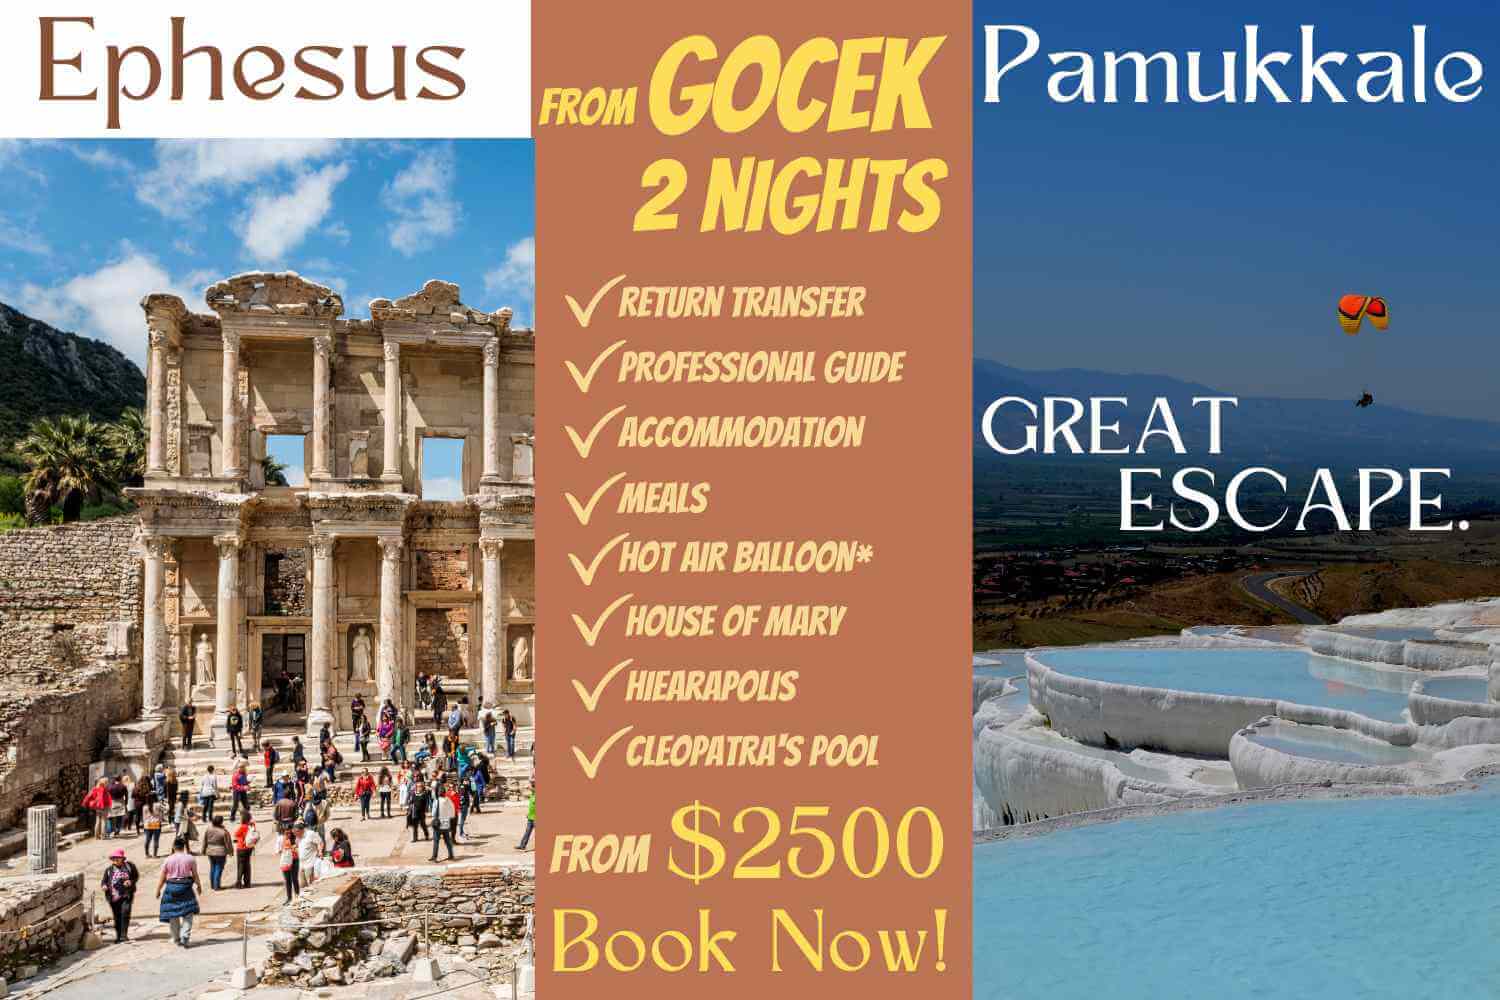 Ephesus and Pamukkale tours from Gocek. Accommodation , Tour Guide and return Transfer included